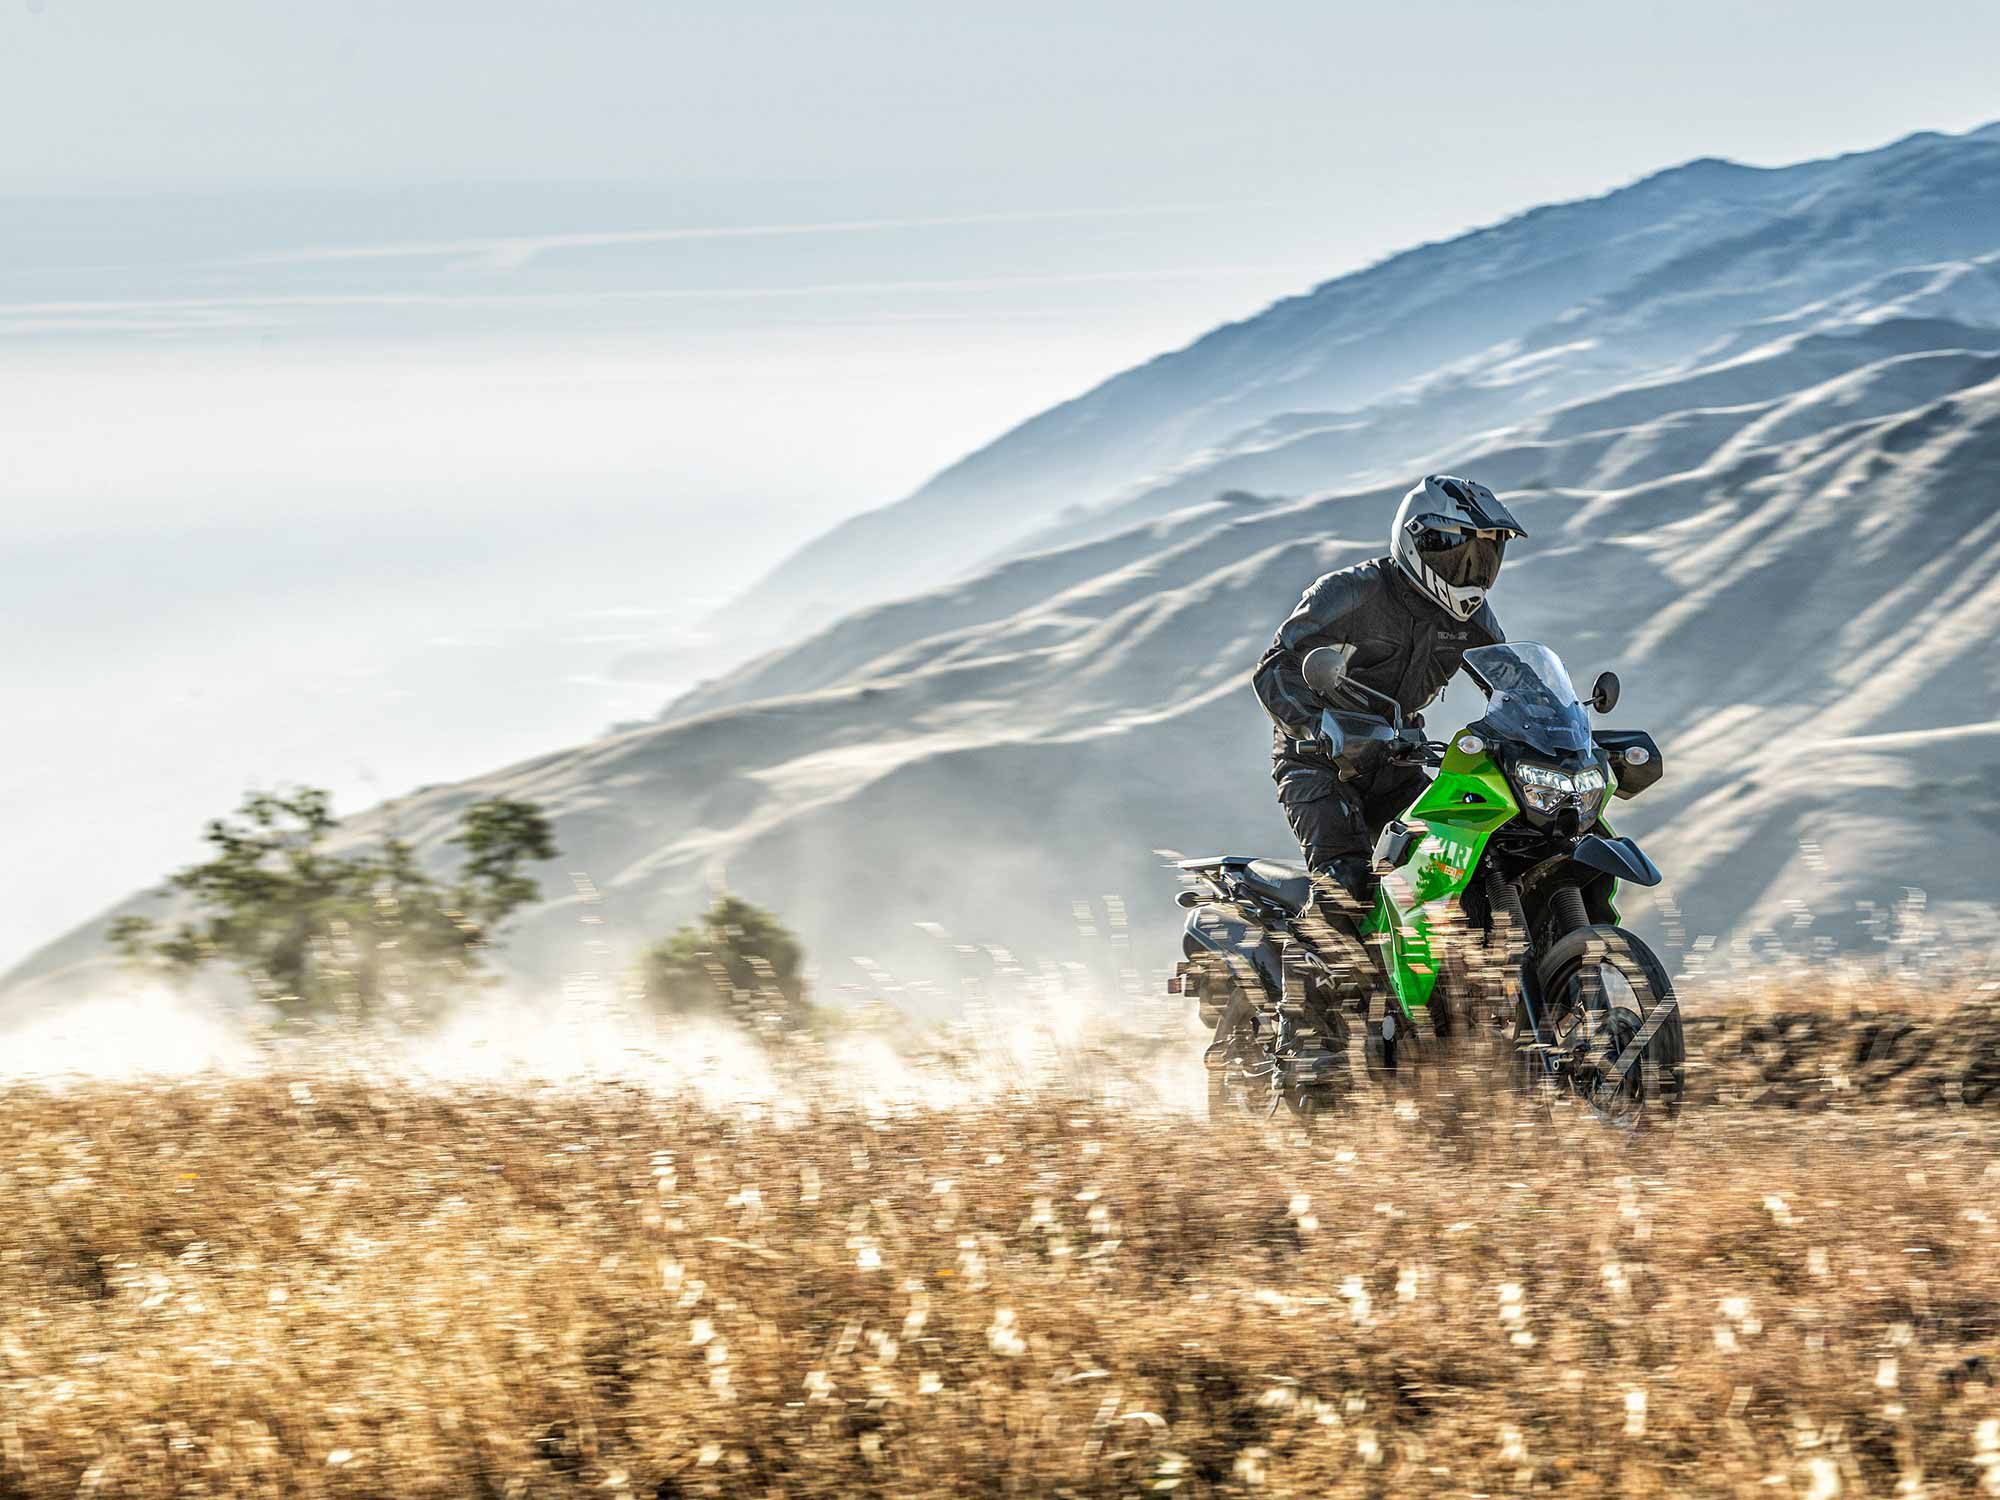 The new KLR S’ adjustments contribute to confident touch-downs. Dusty adventures await riders of all sizes.